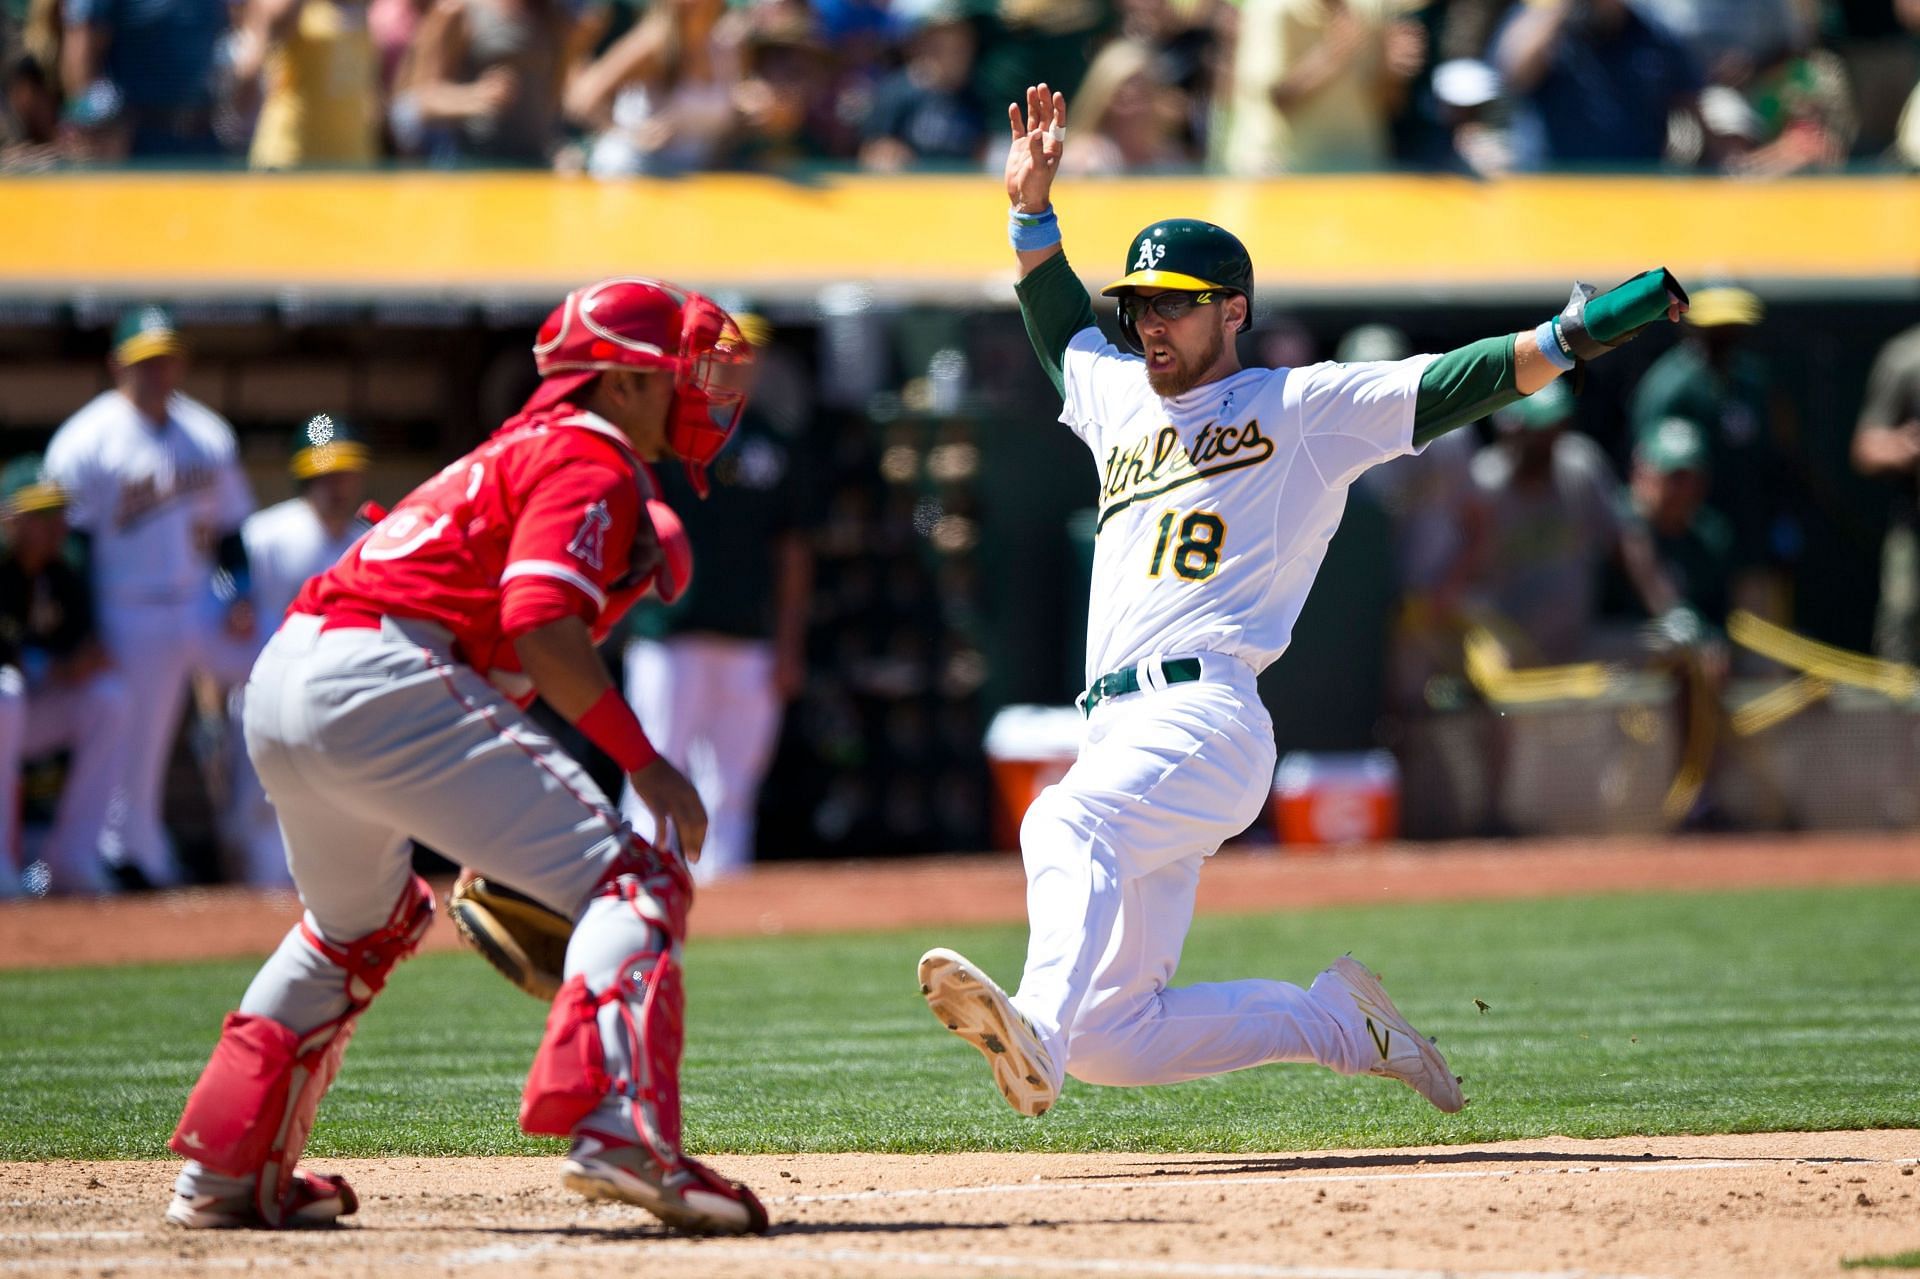 Los Angeles Angels of Anaheim and Oakland Athletics wrap up their series as their battle on the bay concludes on Sunday May 15th.